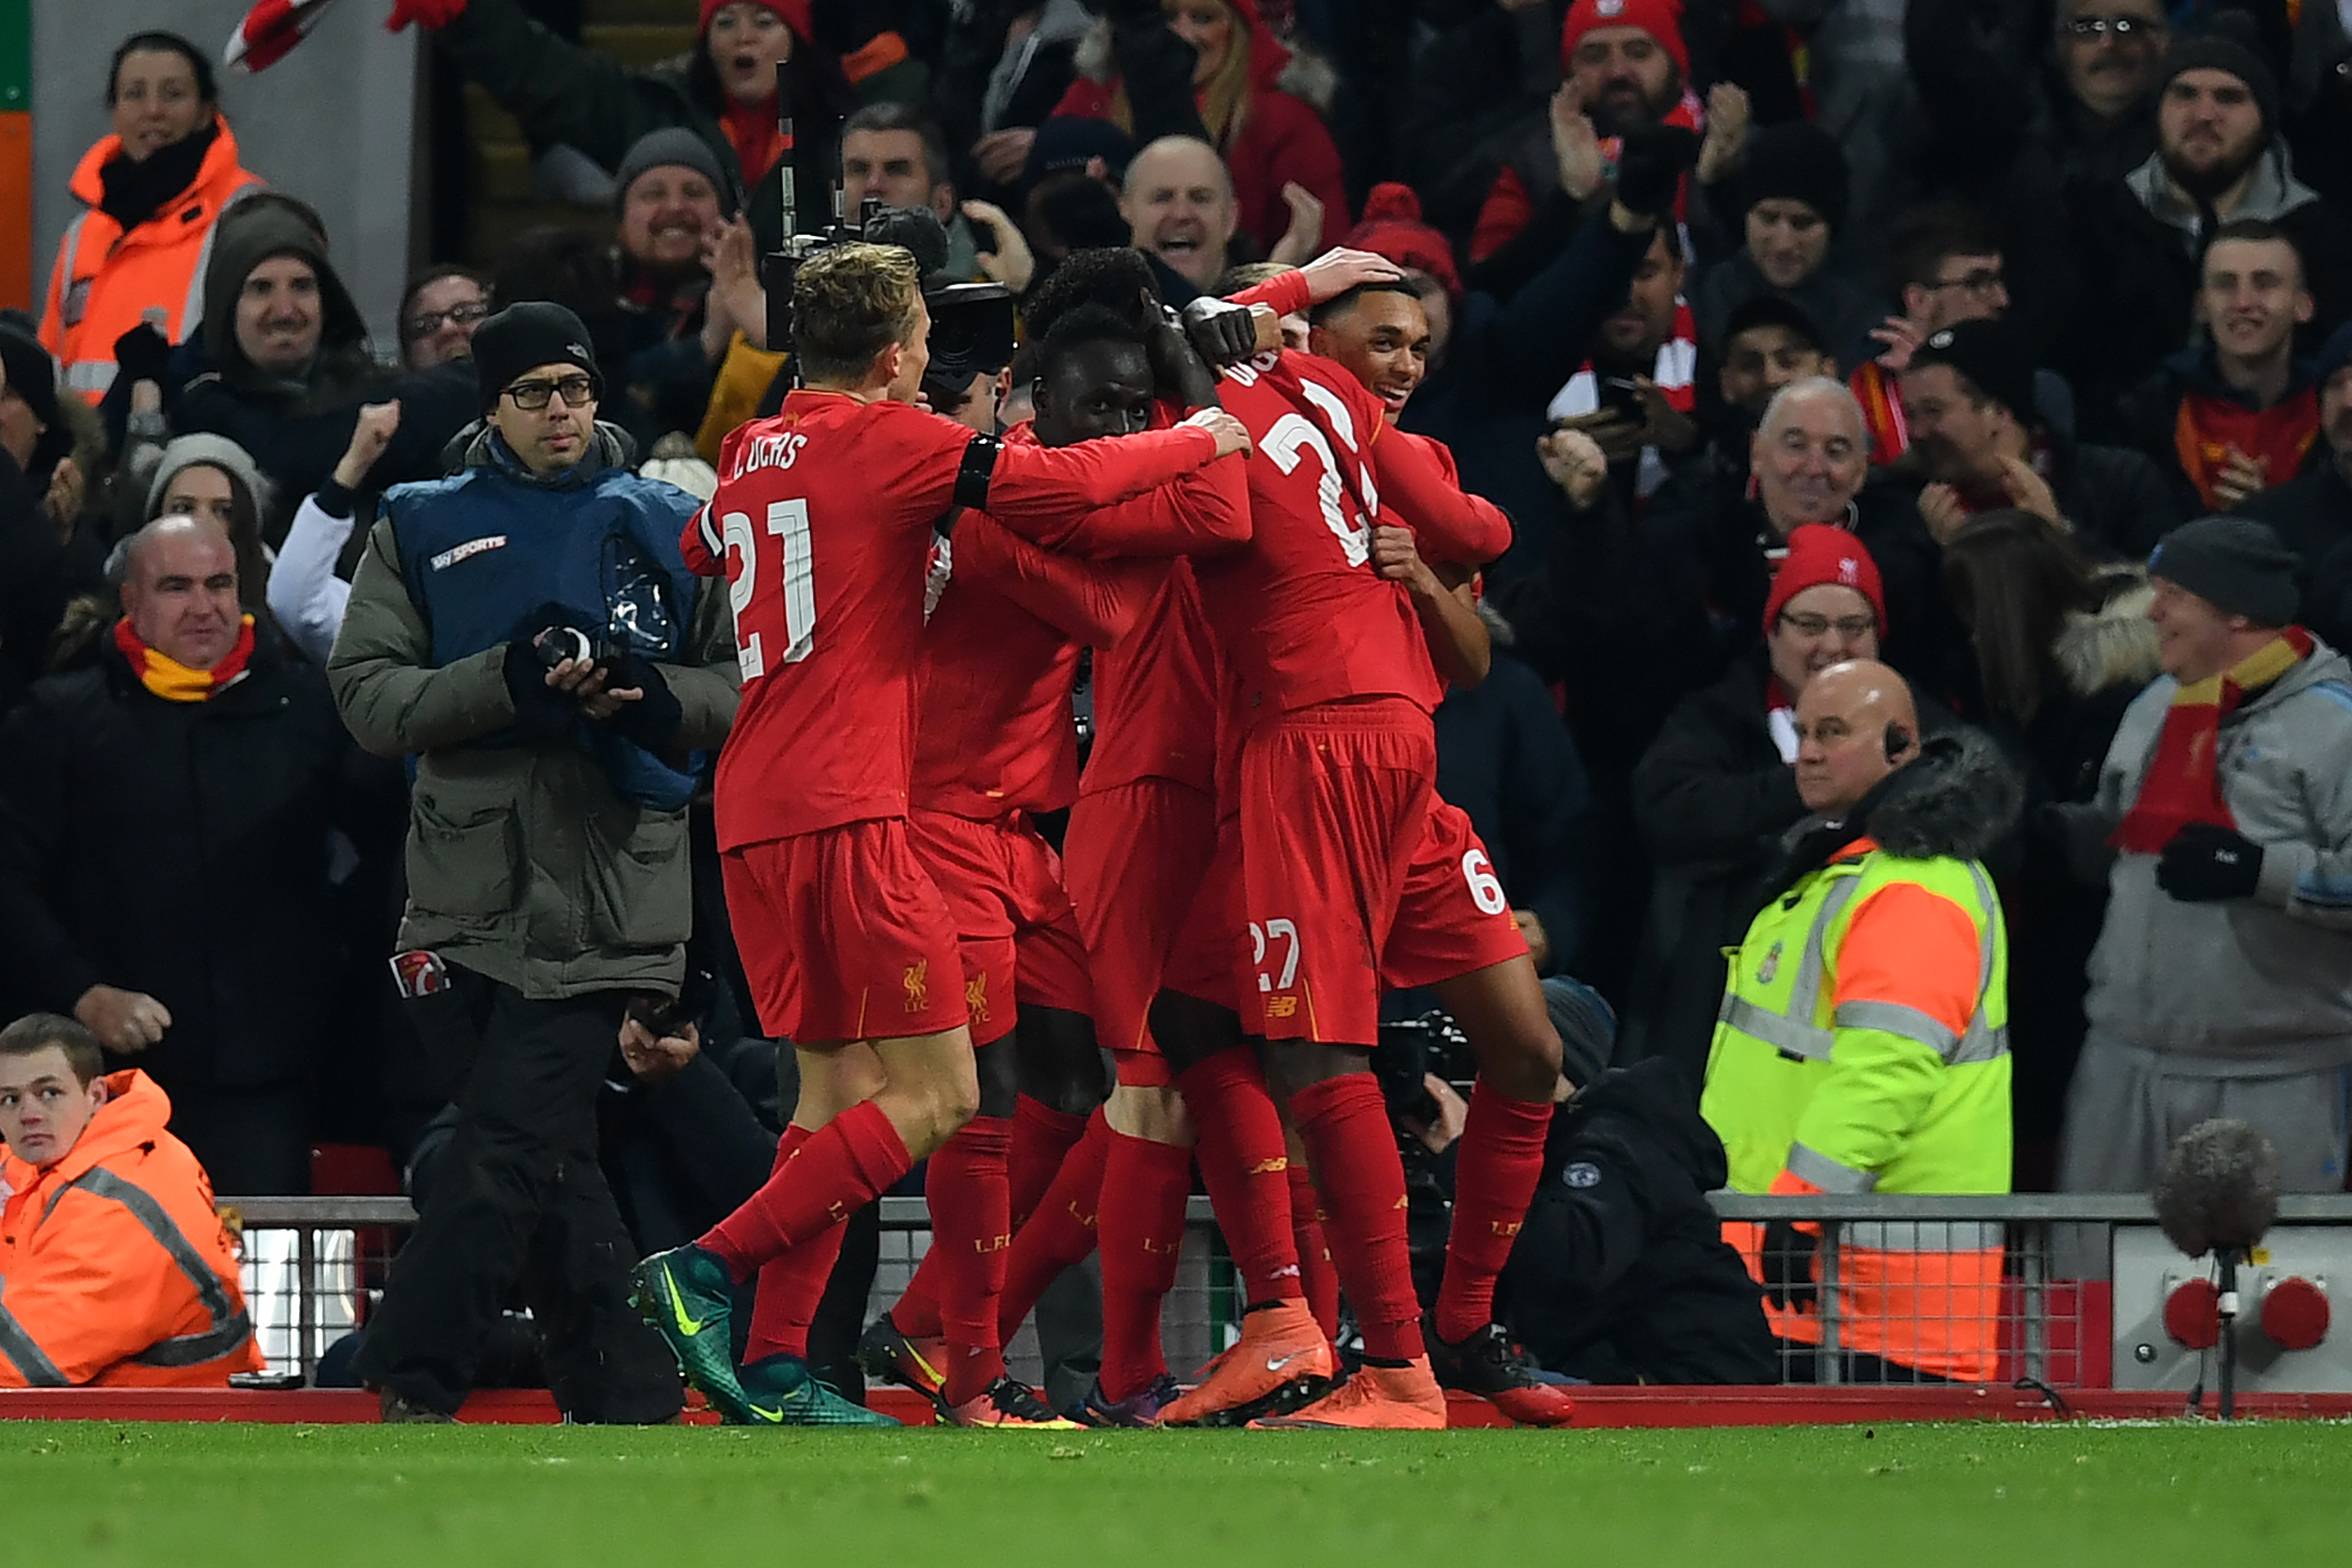 Liverpool's Belgian striker Divock Origi celebrates with teammates after scoring his team's first goal during the EFL (English Football League) Cup quarter-final football match between Liverpool and Leeds United at Anfield in Liverpool, north west England on November 29, 2016. / AFP / Paul ELLIS / RESTRICTED TO EDITORIAL USE. No use with unauthorized audio, video, data, fixture lists, club/league logos or 'live' services. Online in-match use limited to 75 images, no video emulation. No use in betting, games or single club/league/player publications.  /         (Photo credit should read PAUL ELLIS/AFP/Getty Images)